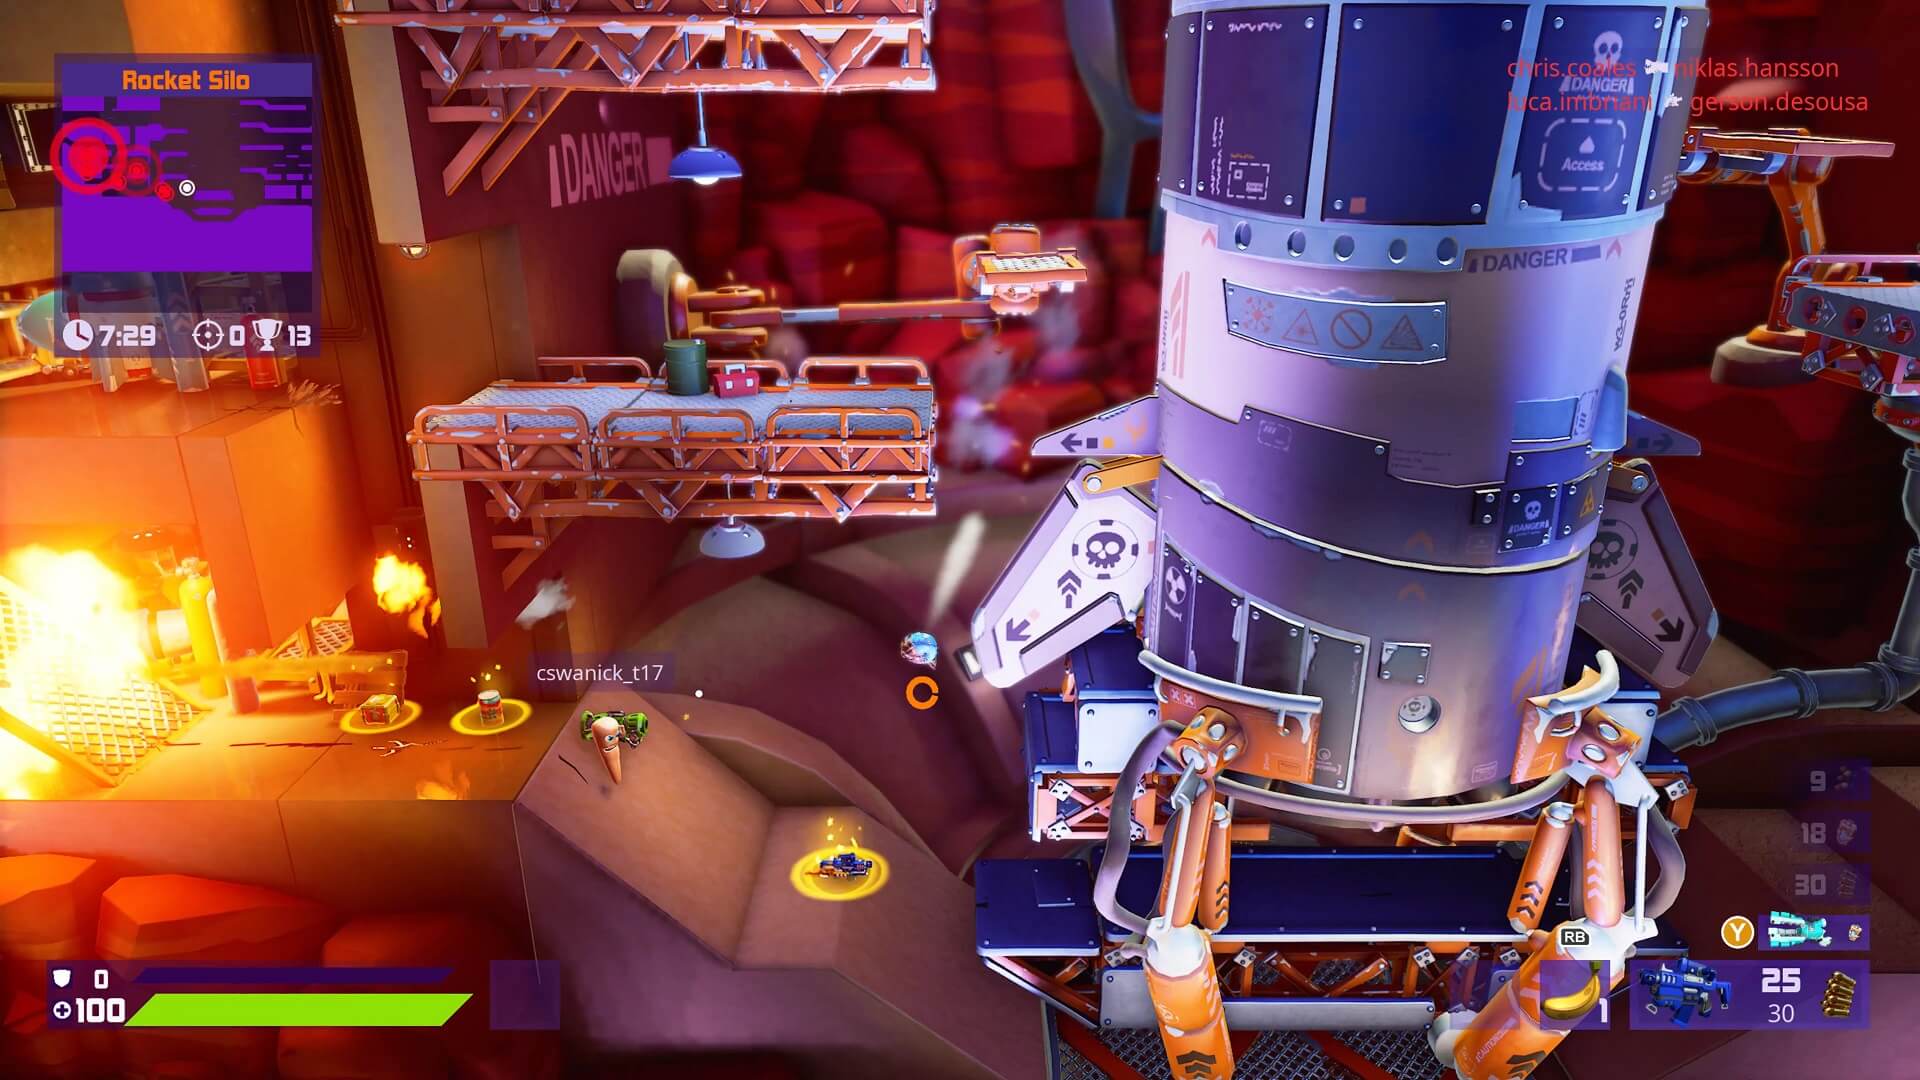 Worms Rumble, a game created by Team17, who recently had to back down over NFTs